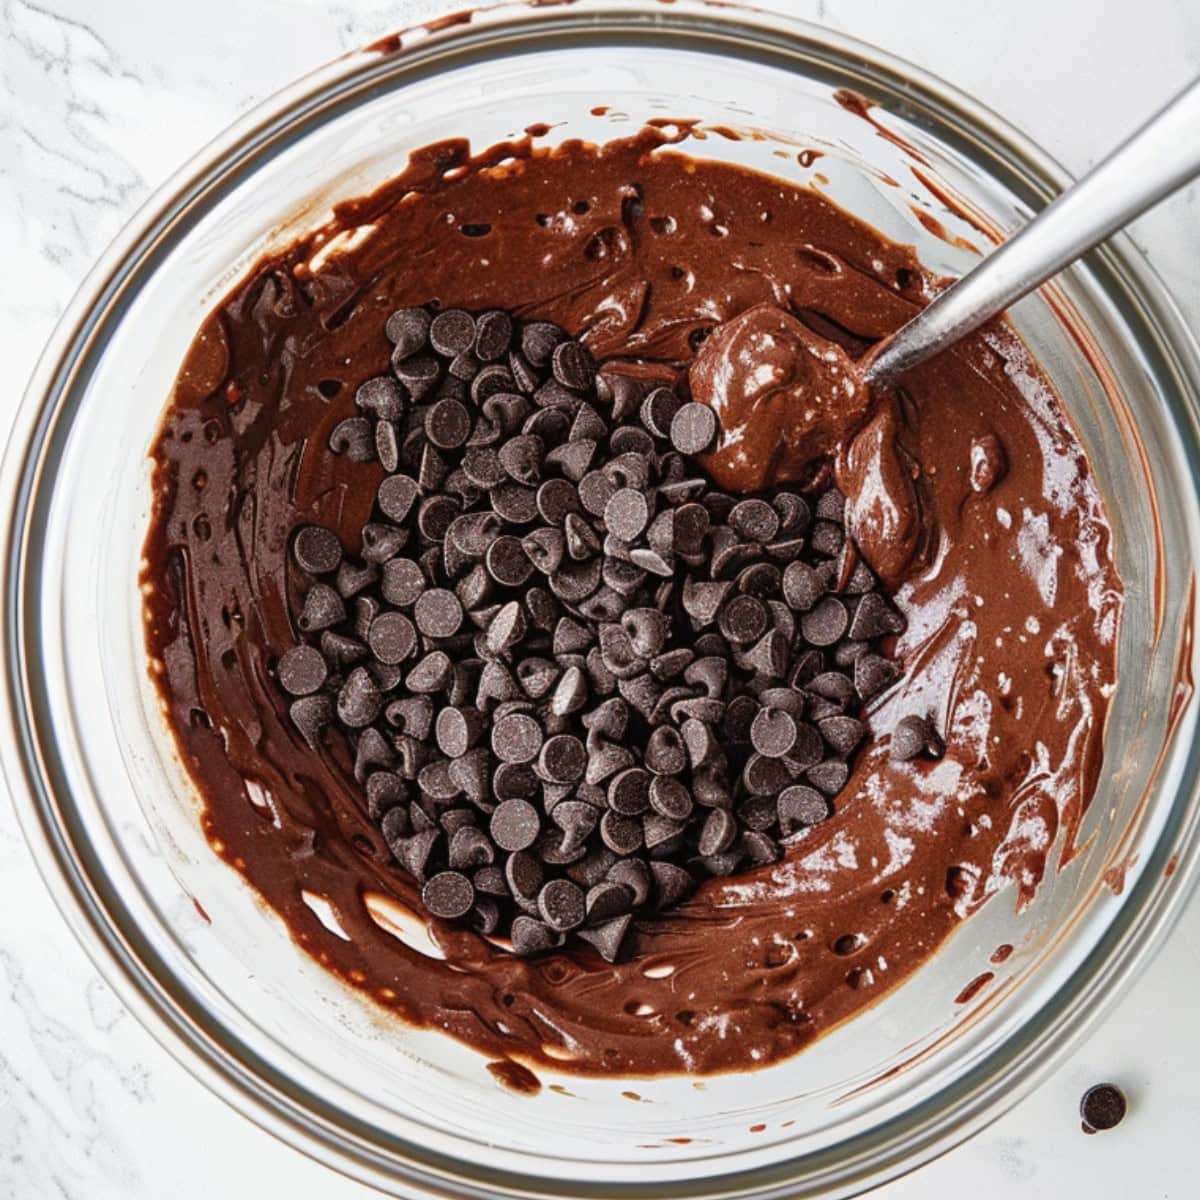 Top View of Too Much Chocolate Cake Batter with Chocolate Chips in a Glass Bowl 